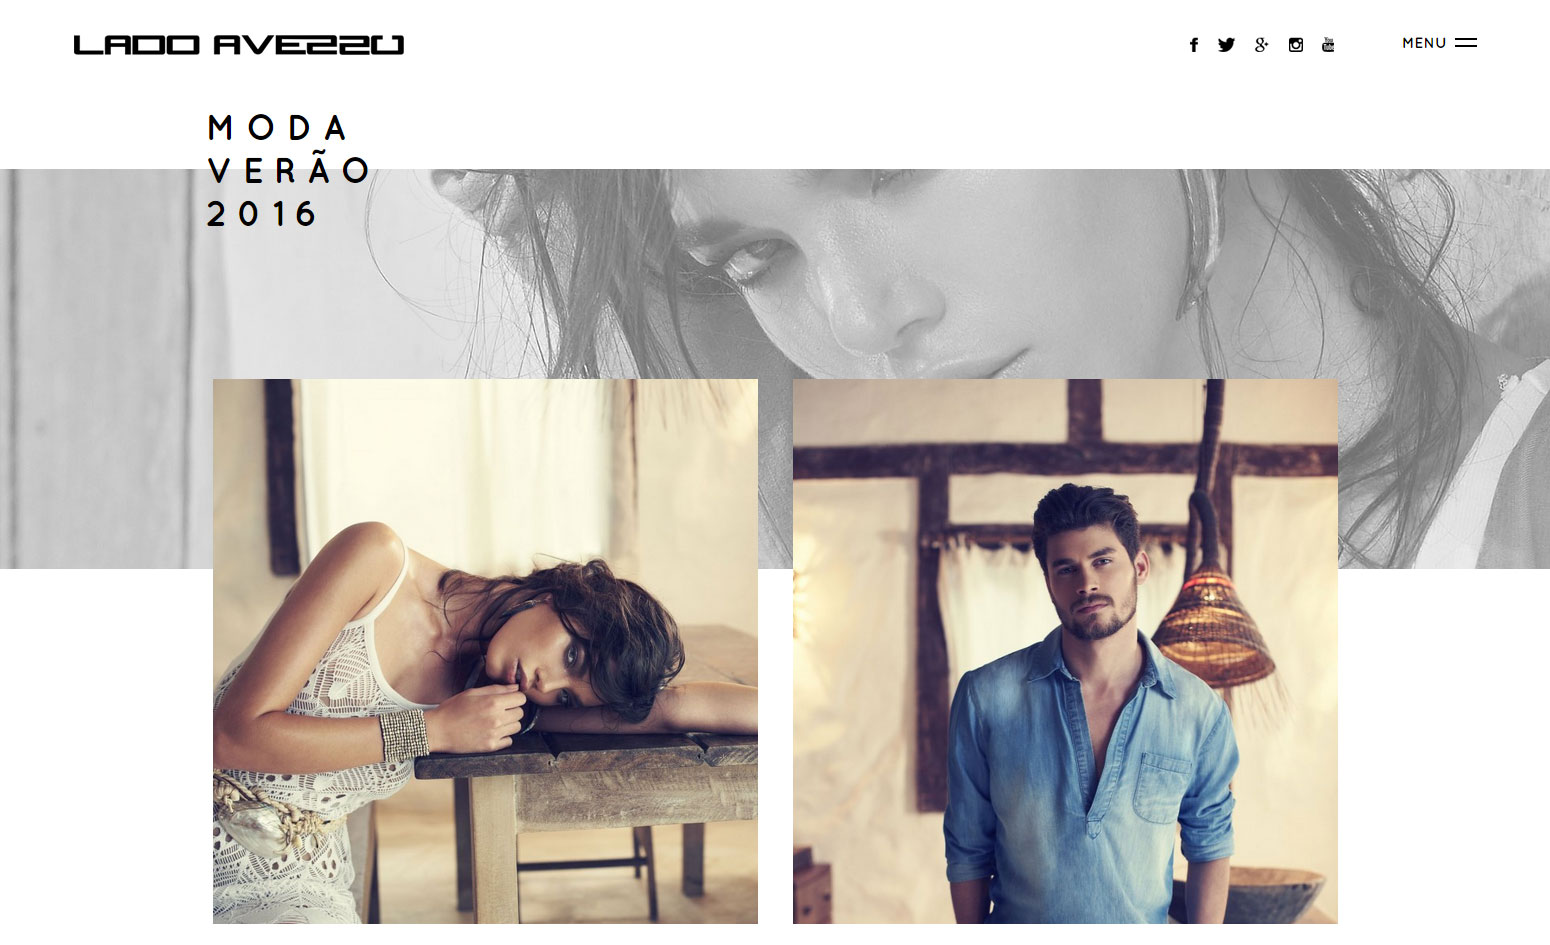 Lado Avesso - Website of the Day